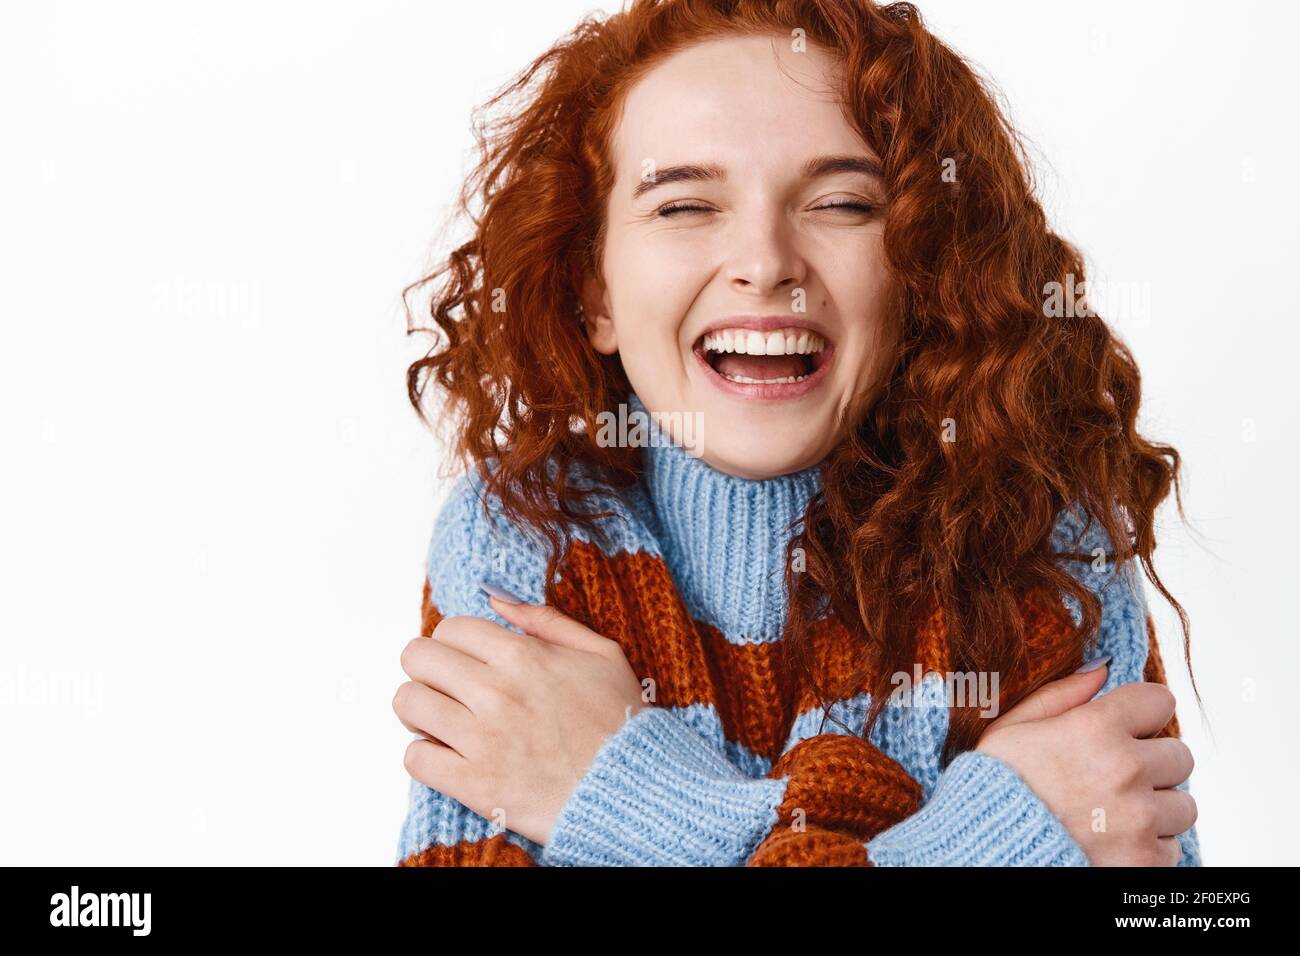 Close up portrait of happy beautiful redhead woman with curly natural hair, pale smooth skin, laughing sincere with eyes closed and hugging herself Stock Photo